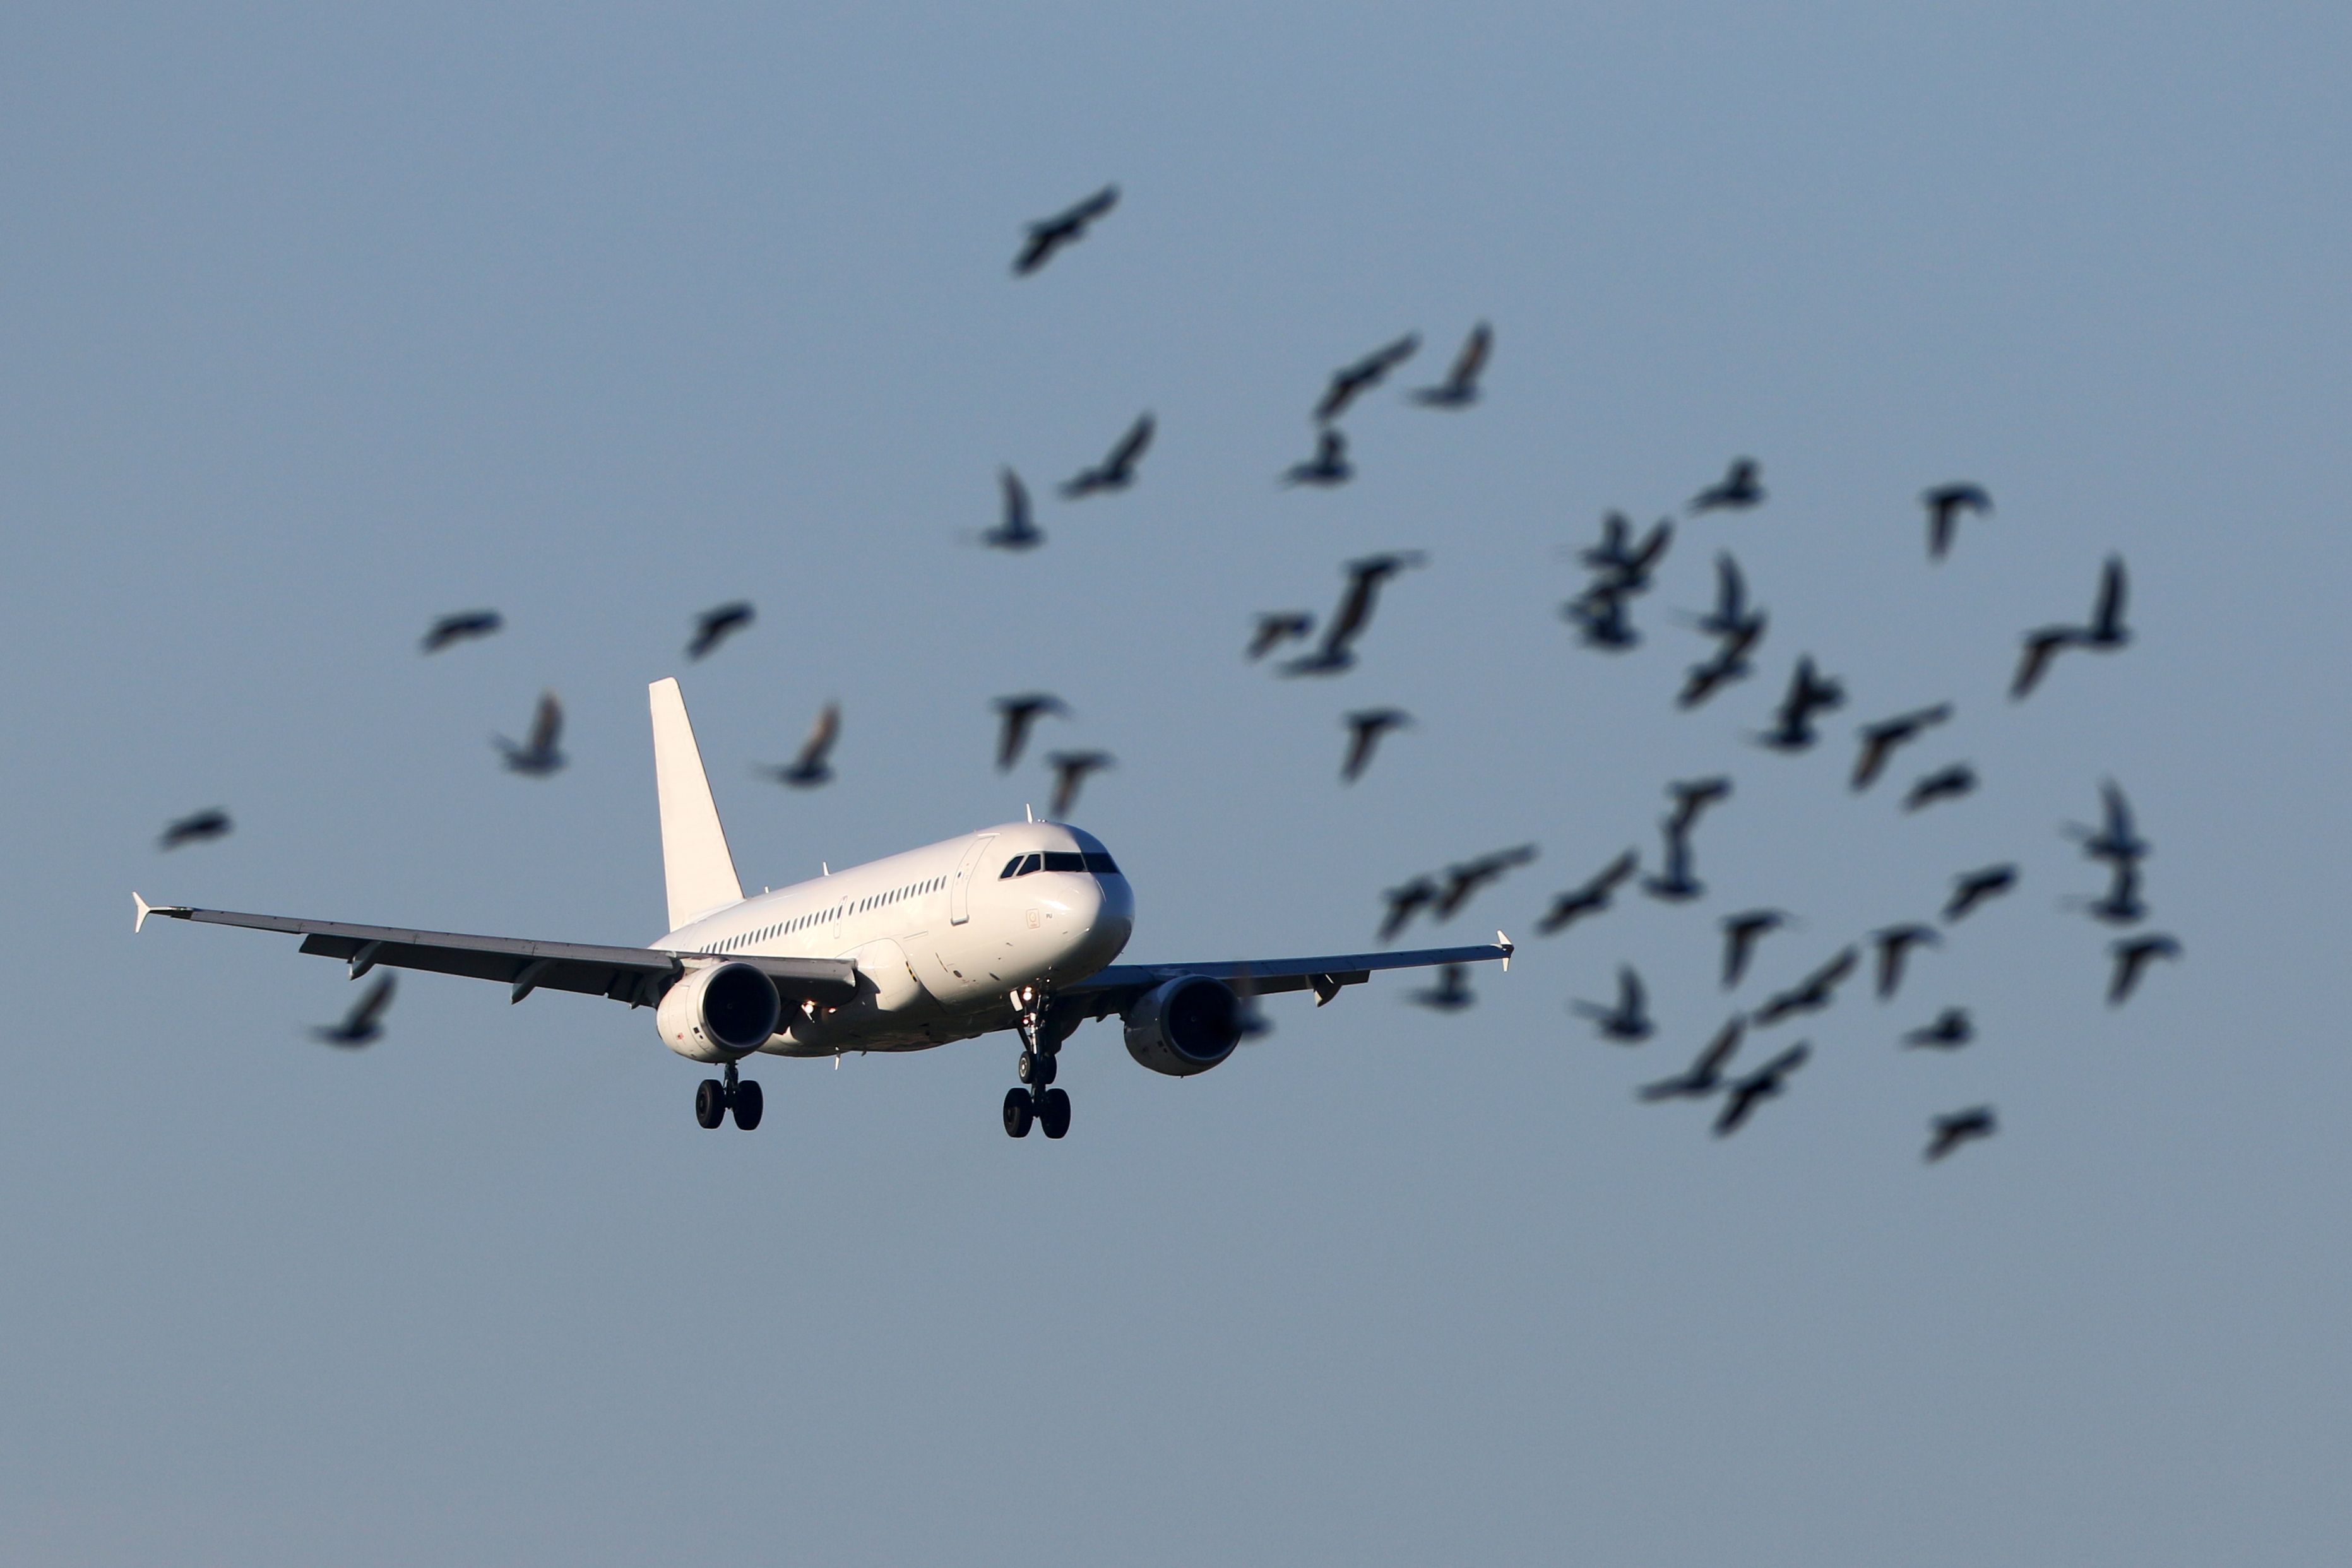 An aircraft flying into a flock of birds.